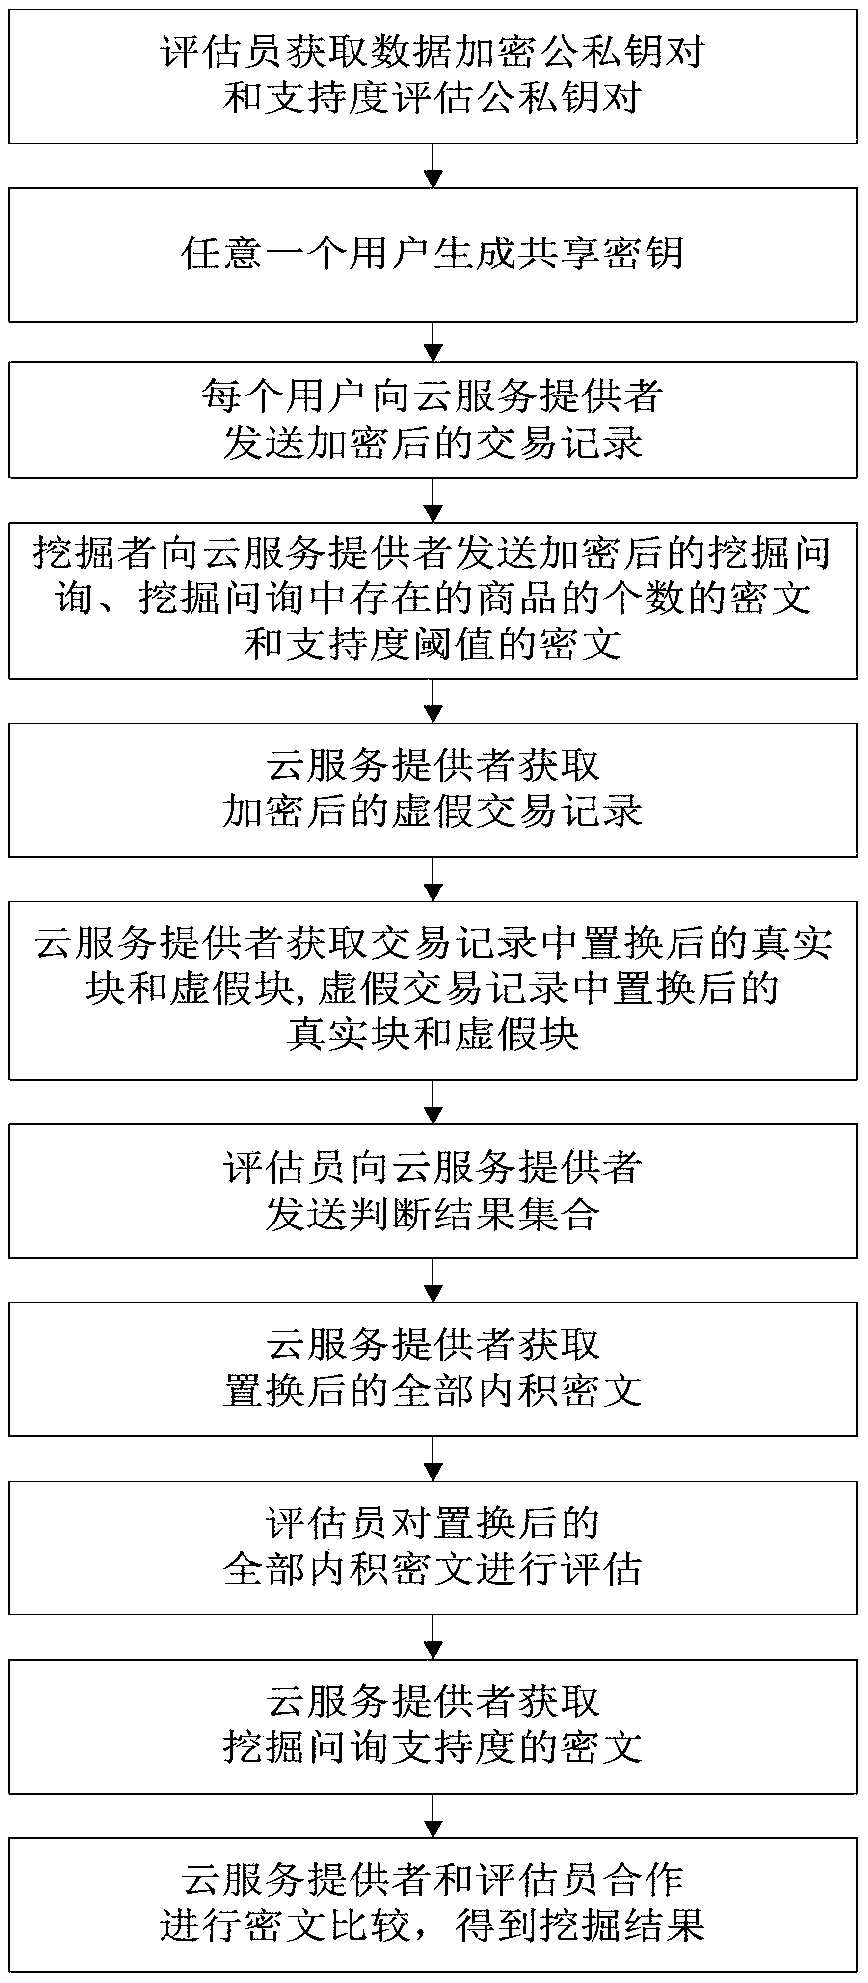 Privacy protection frequent item set mining method for large-scale shopping mall transaction record